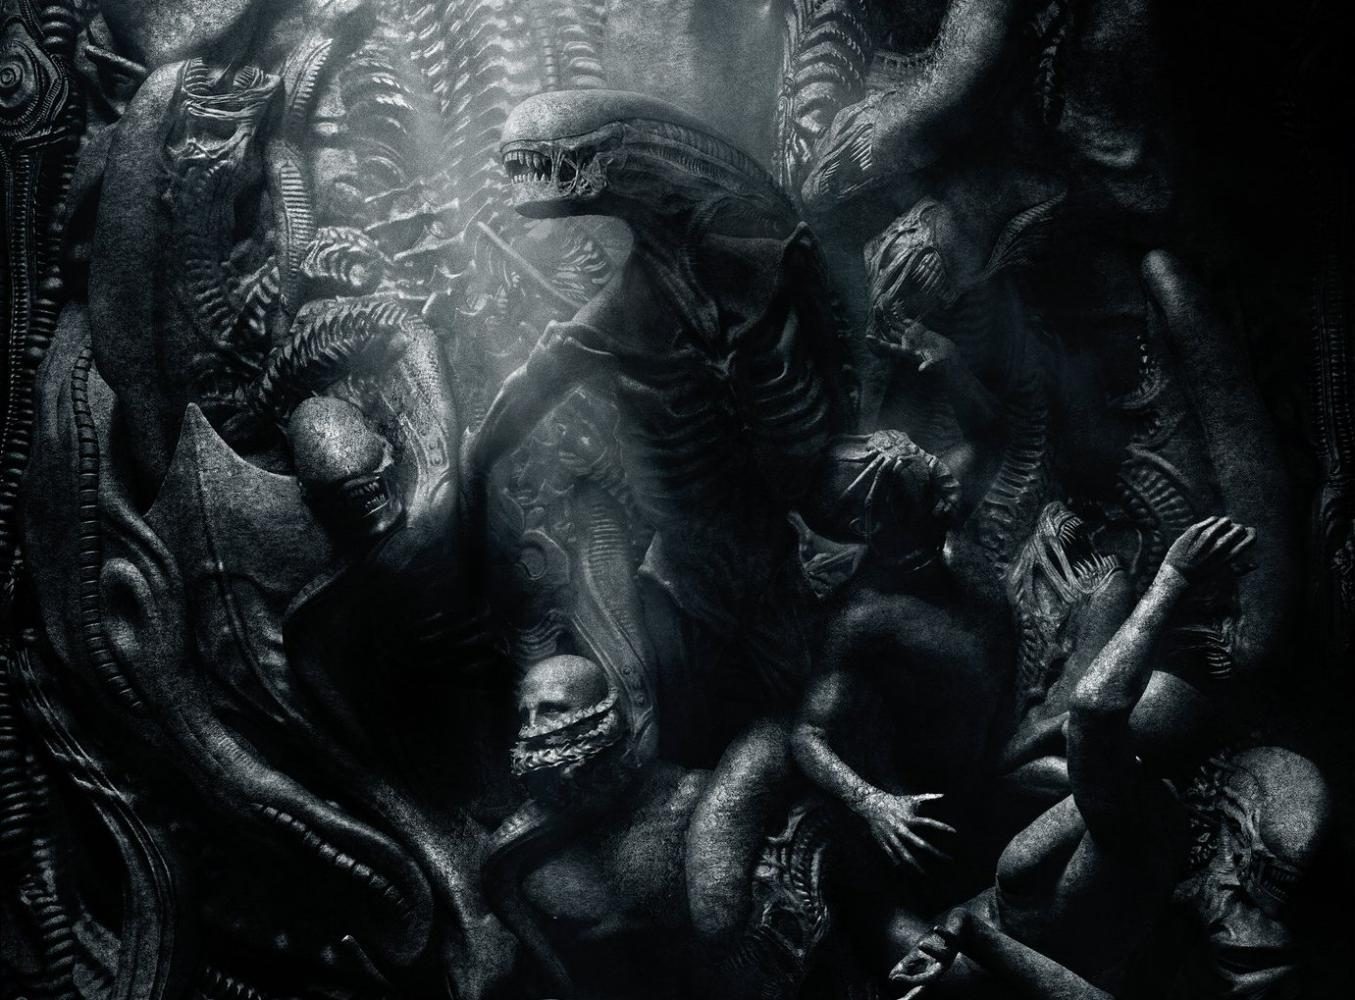 A Look at the New Movie Alien: Covenant